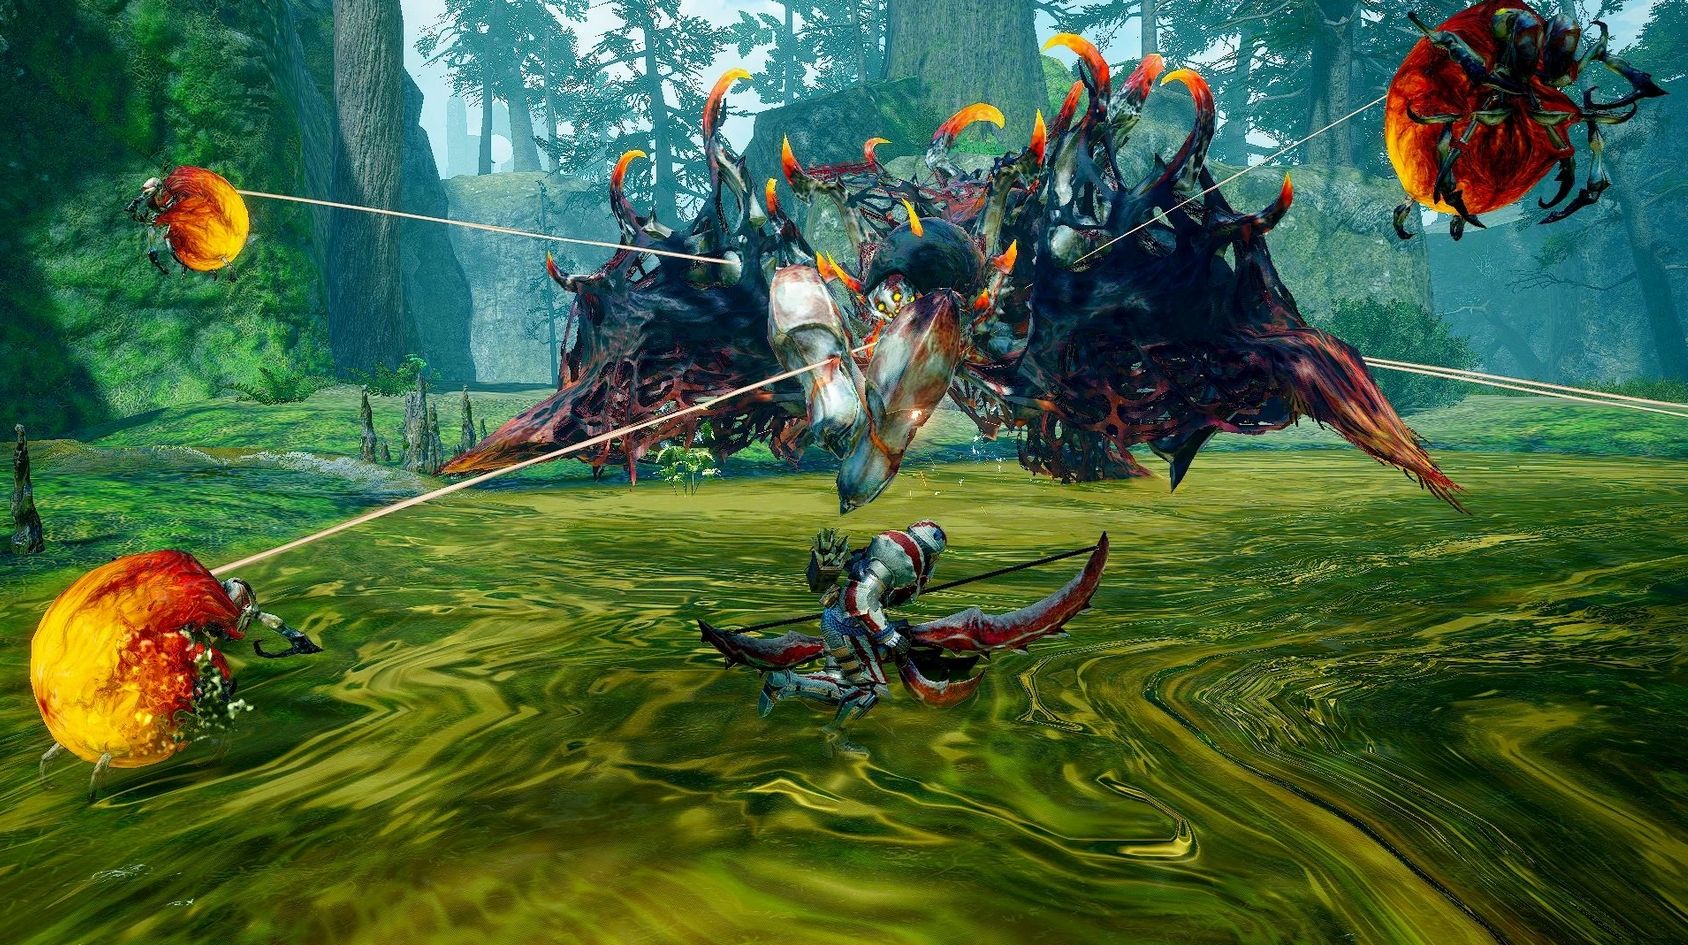 Monster Hunter Rise gameplay. A giant spider covered in black web throws orange baby spiders at the player, who is holding a bow.